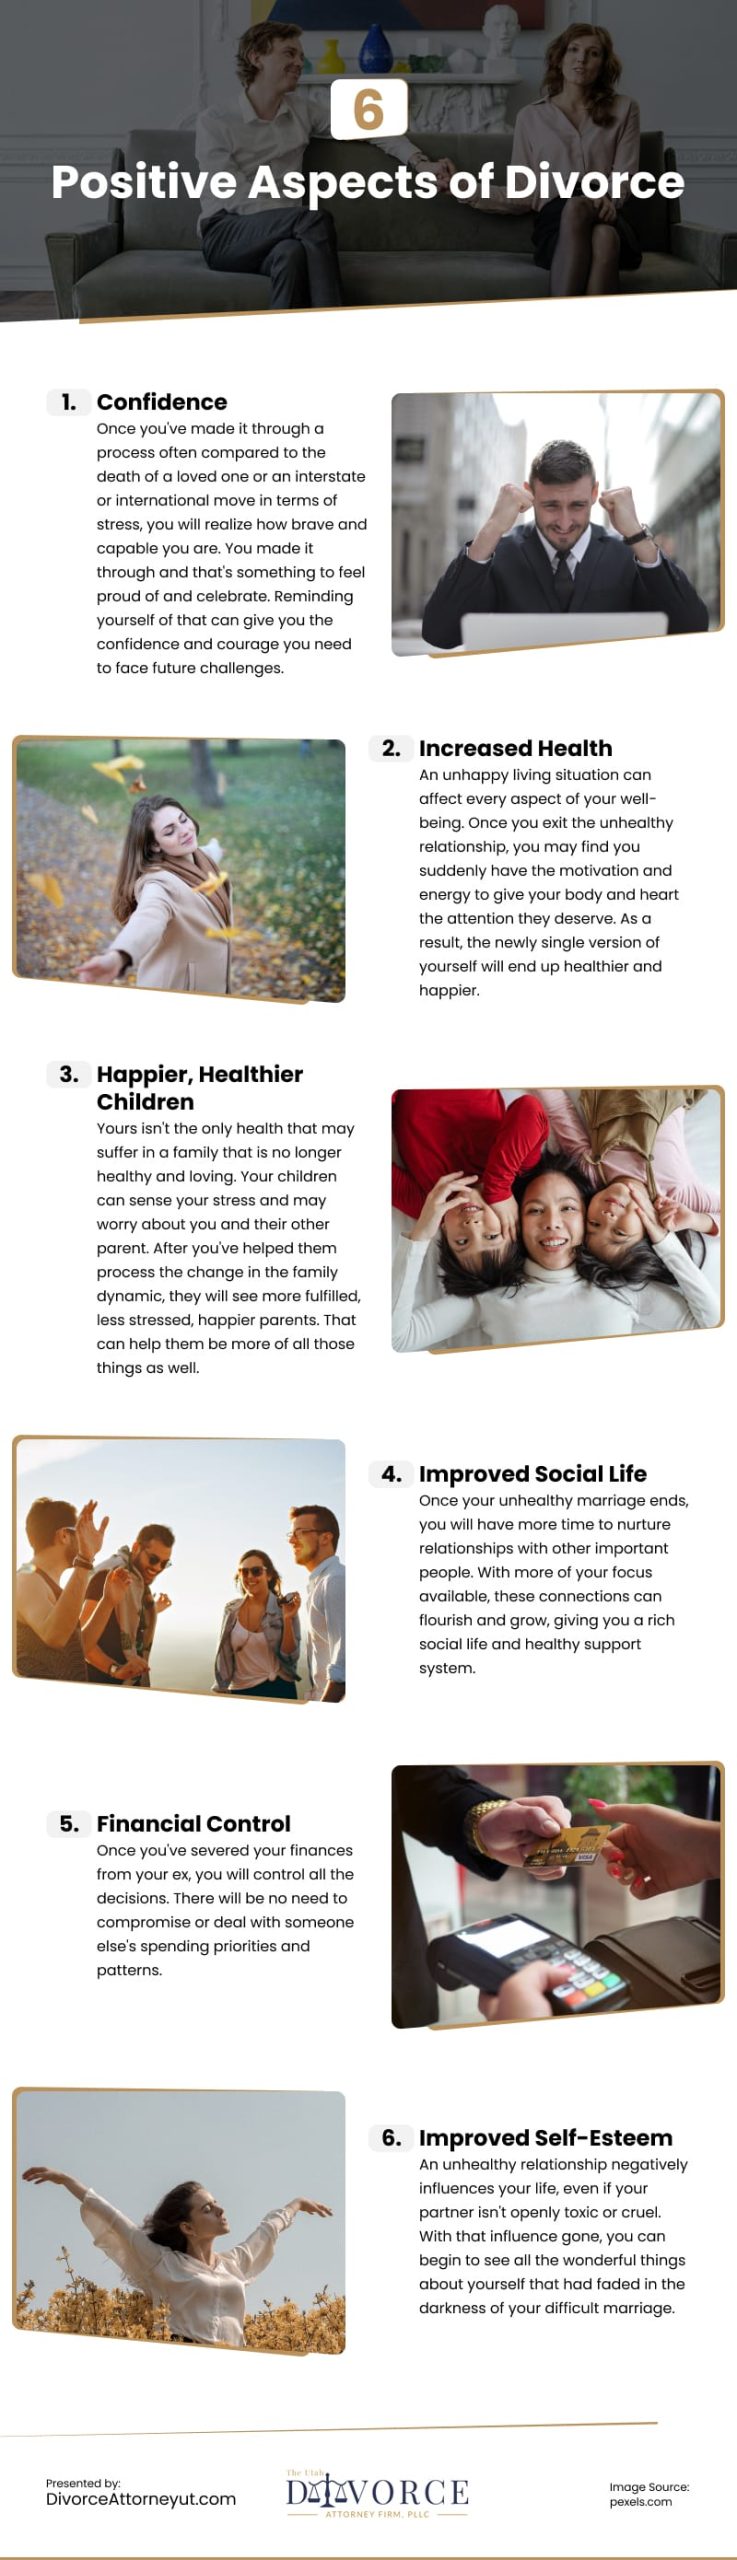 6 Positive Aspects of Divorce Infographic